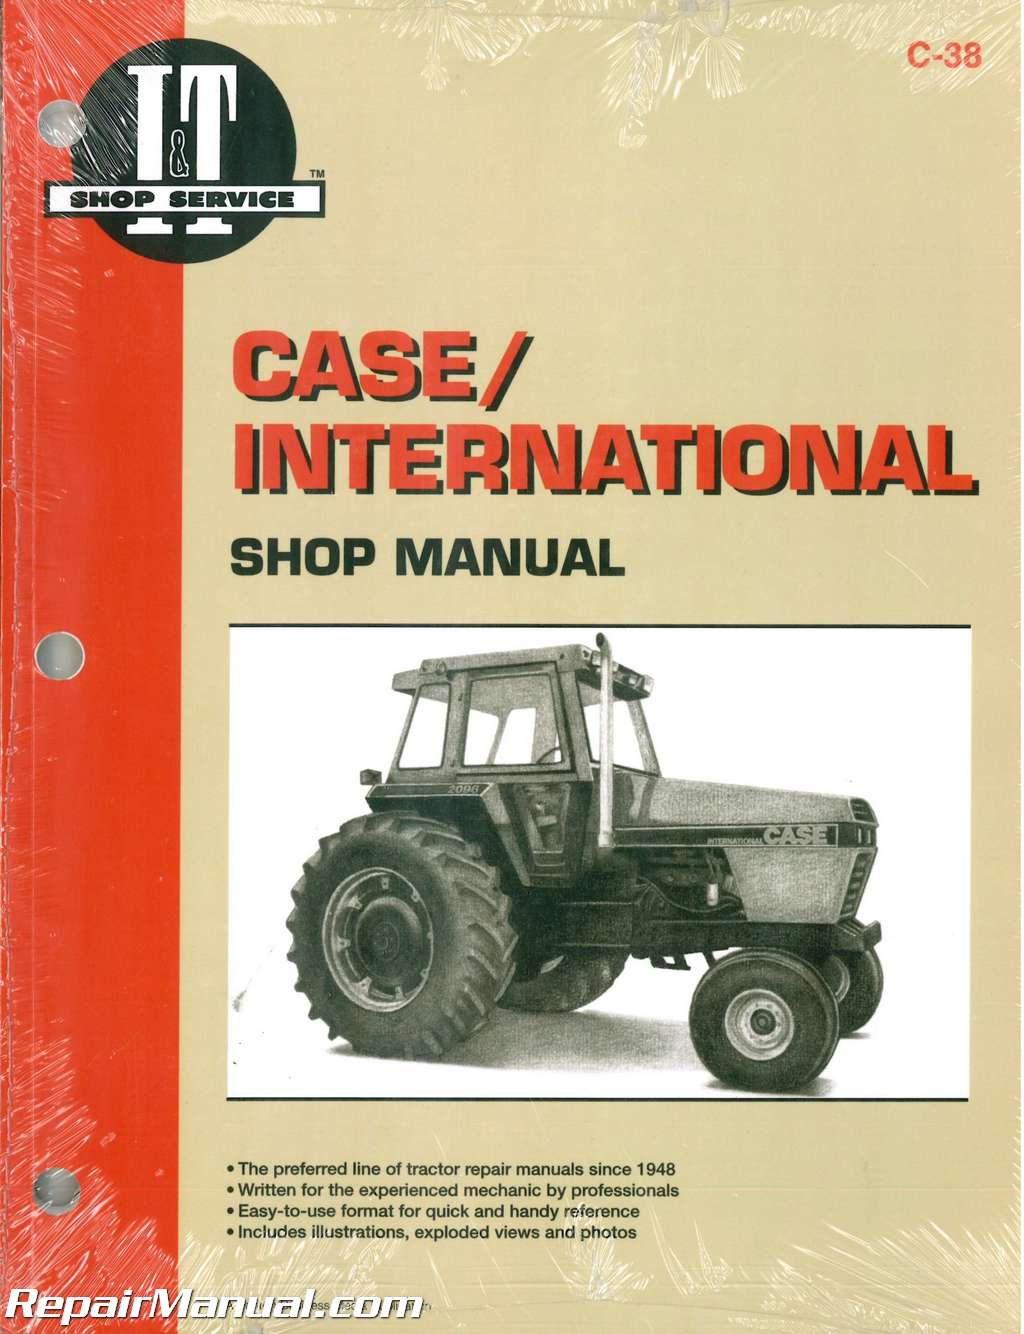 This J I Case Vac Tractor Wiring Diagram. For more detail please visit ...